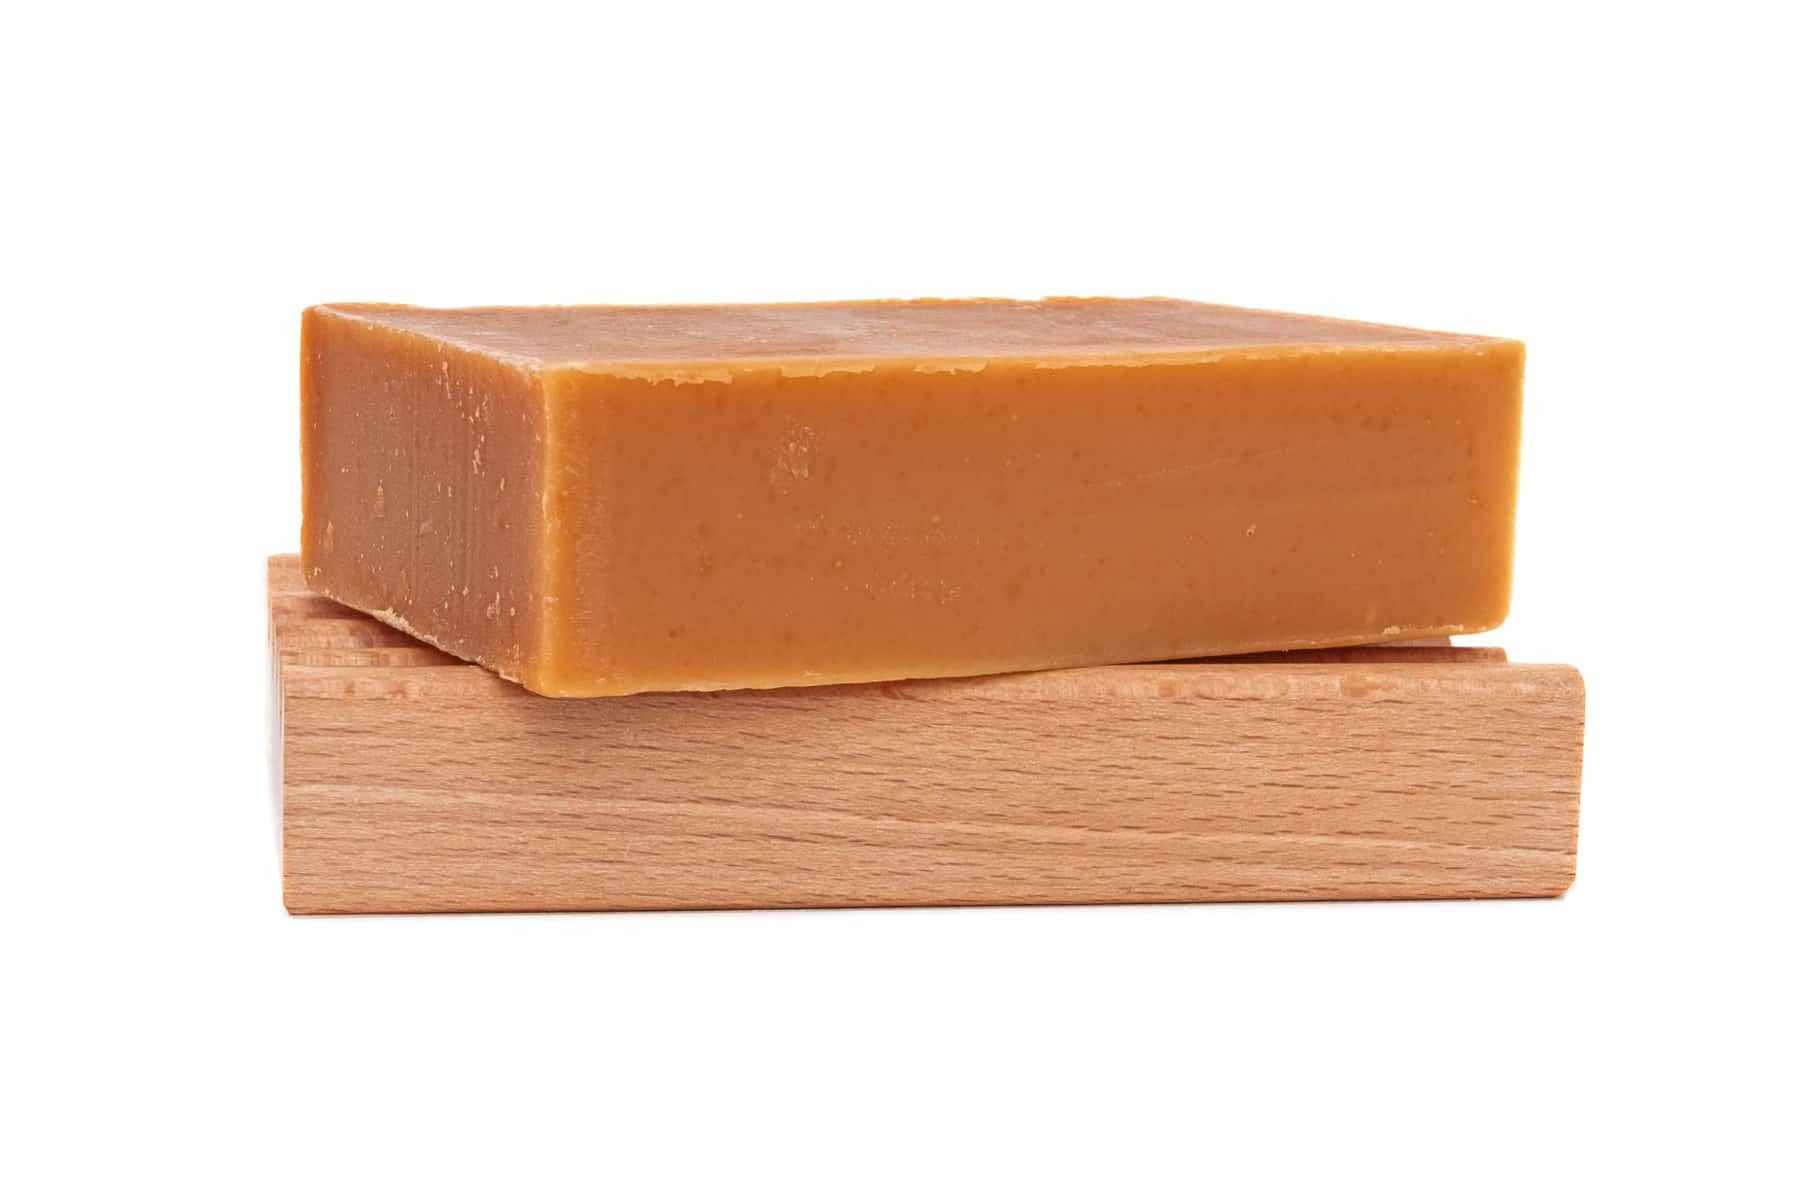 Unwrapped Full Size All Shield bar of soap on a wooden soap dish